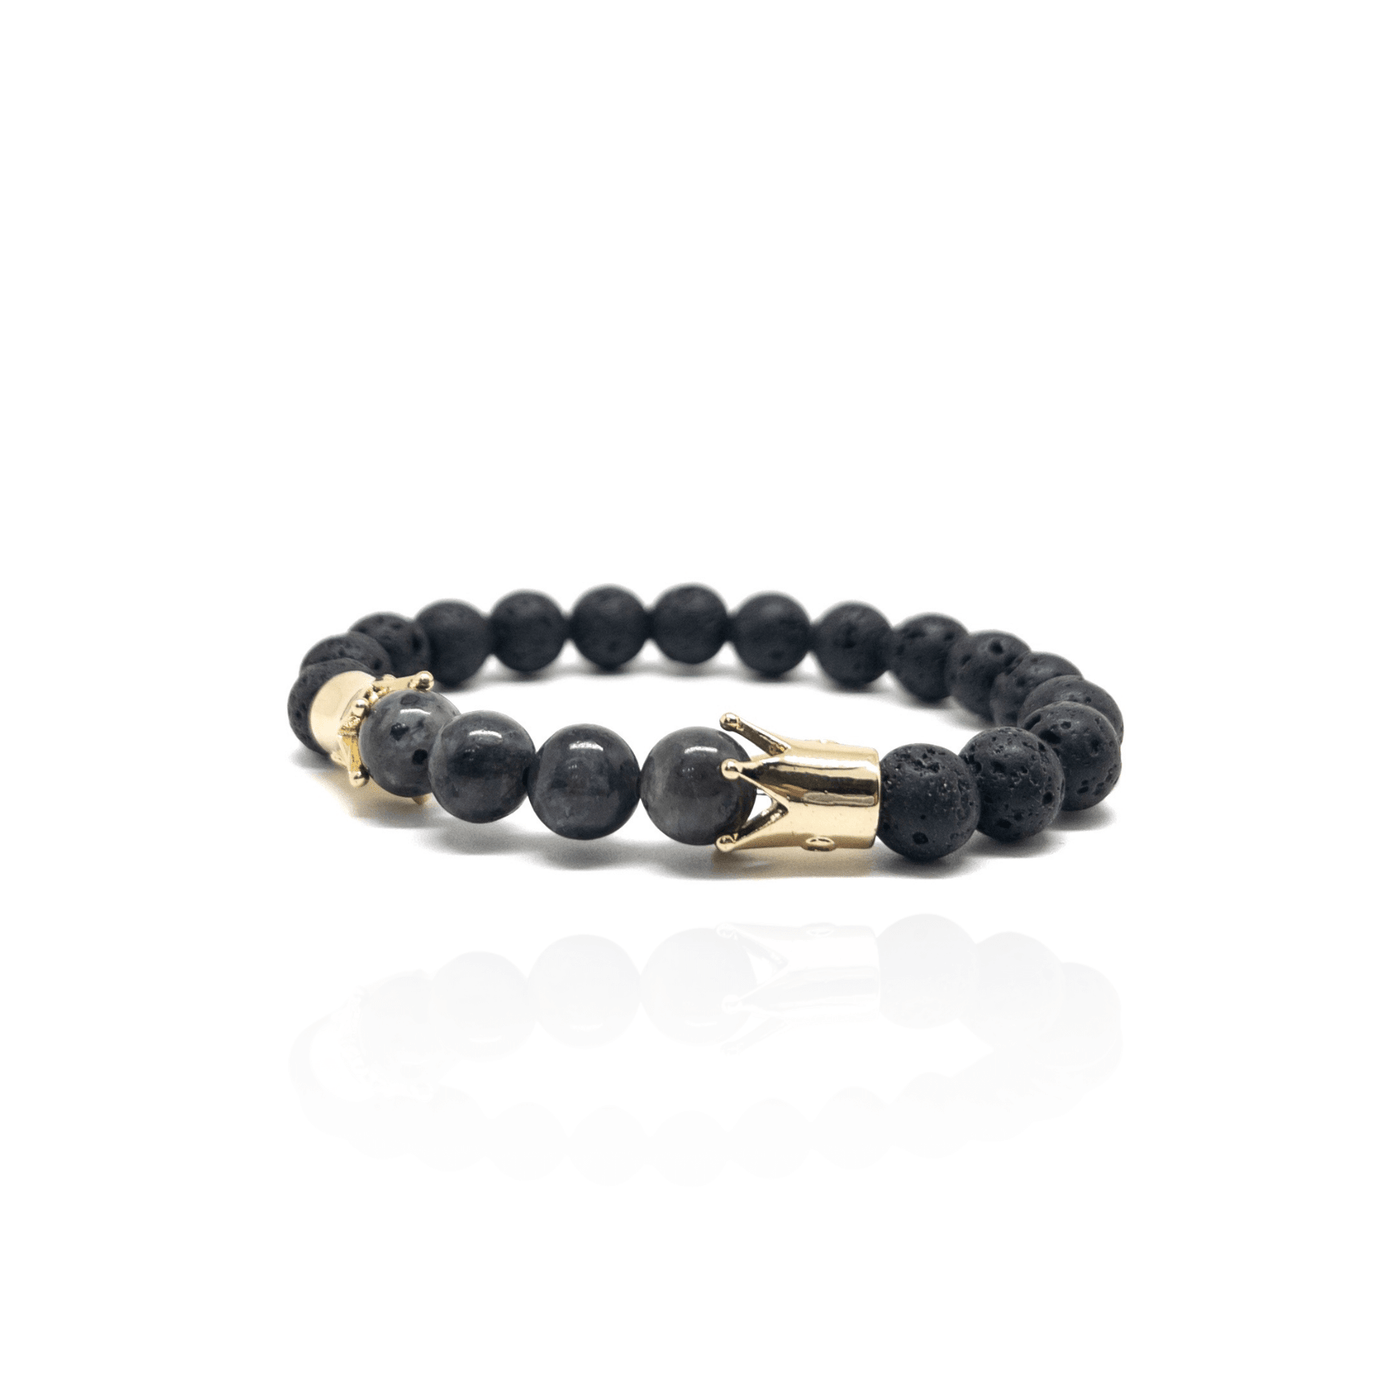 The Gold Plated Double King bracelet